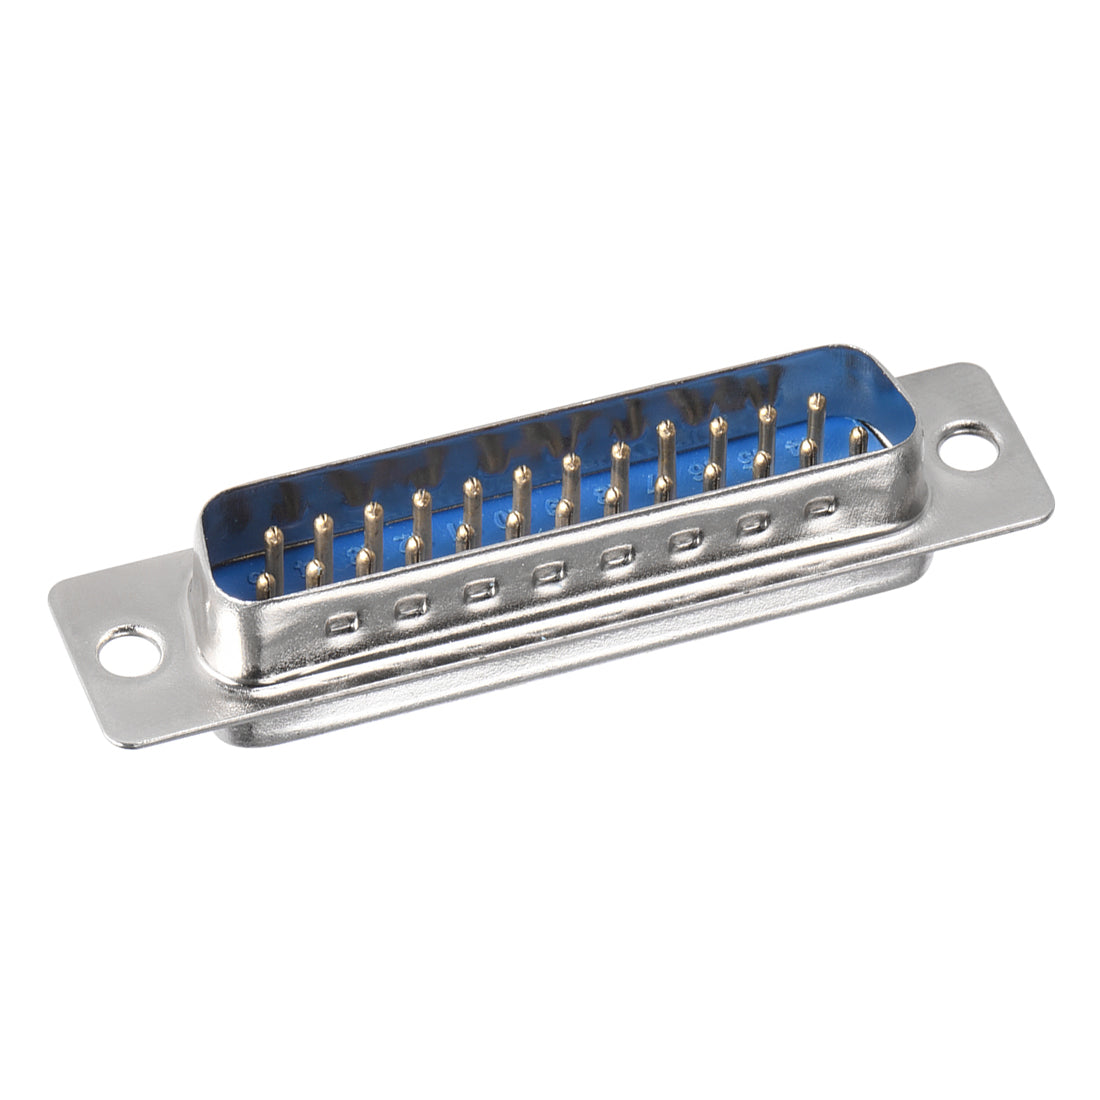 uxcell Uxcell D-sub Connector Male Plug 25-pin 2-row Port Terminal Breakout Solder Type for Mechanical Equipment CNC Computers Blue 1pc